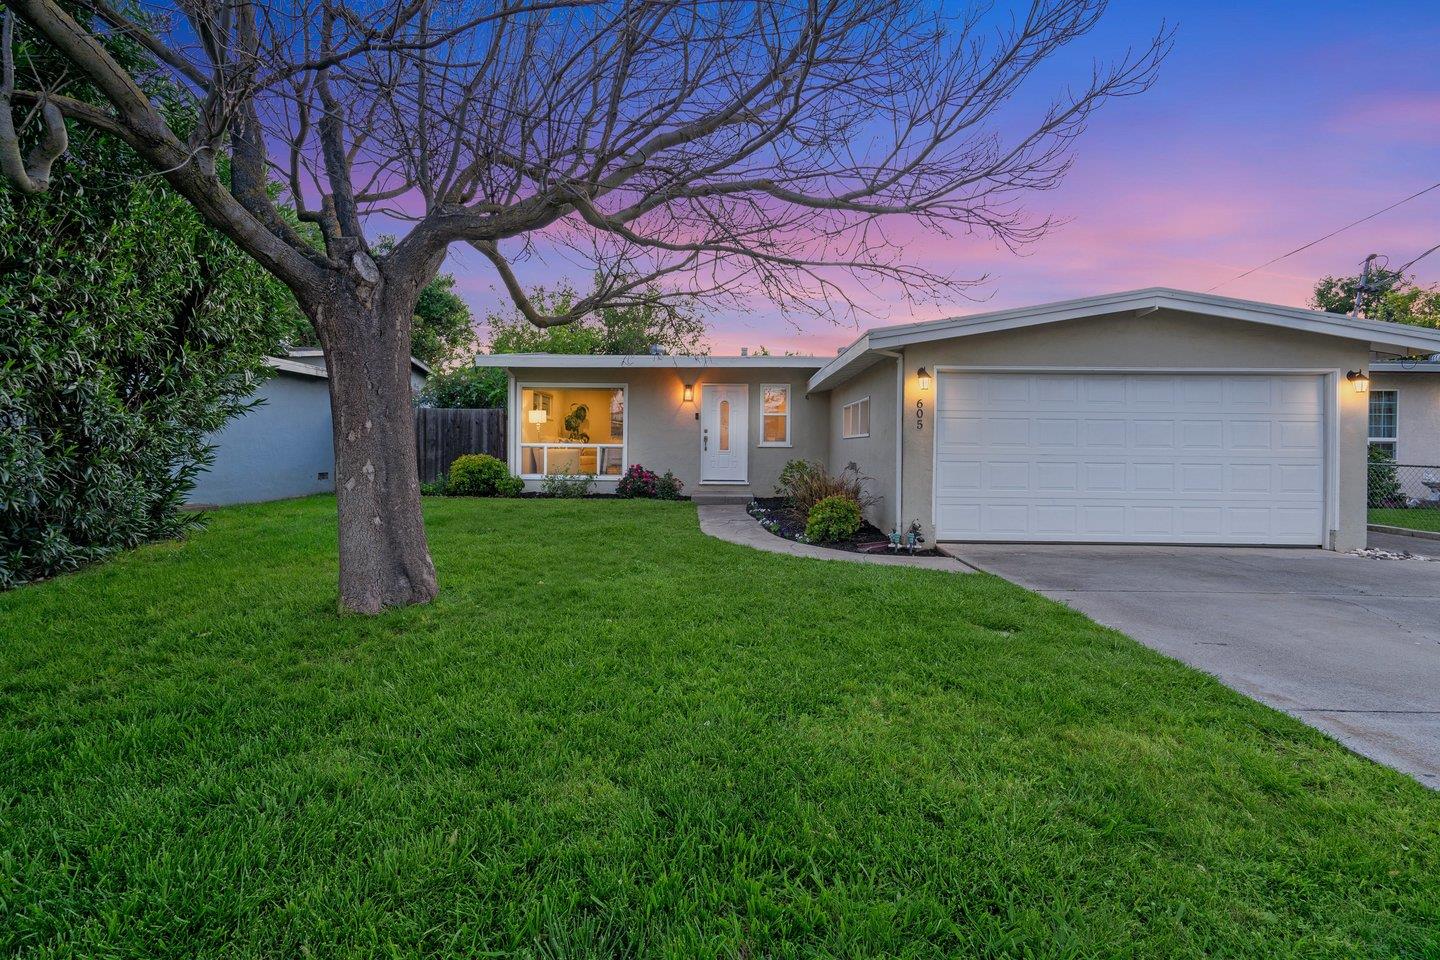 Photo of 605 Weston Dr in Campbell, CA